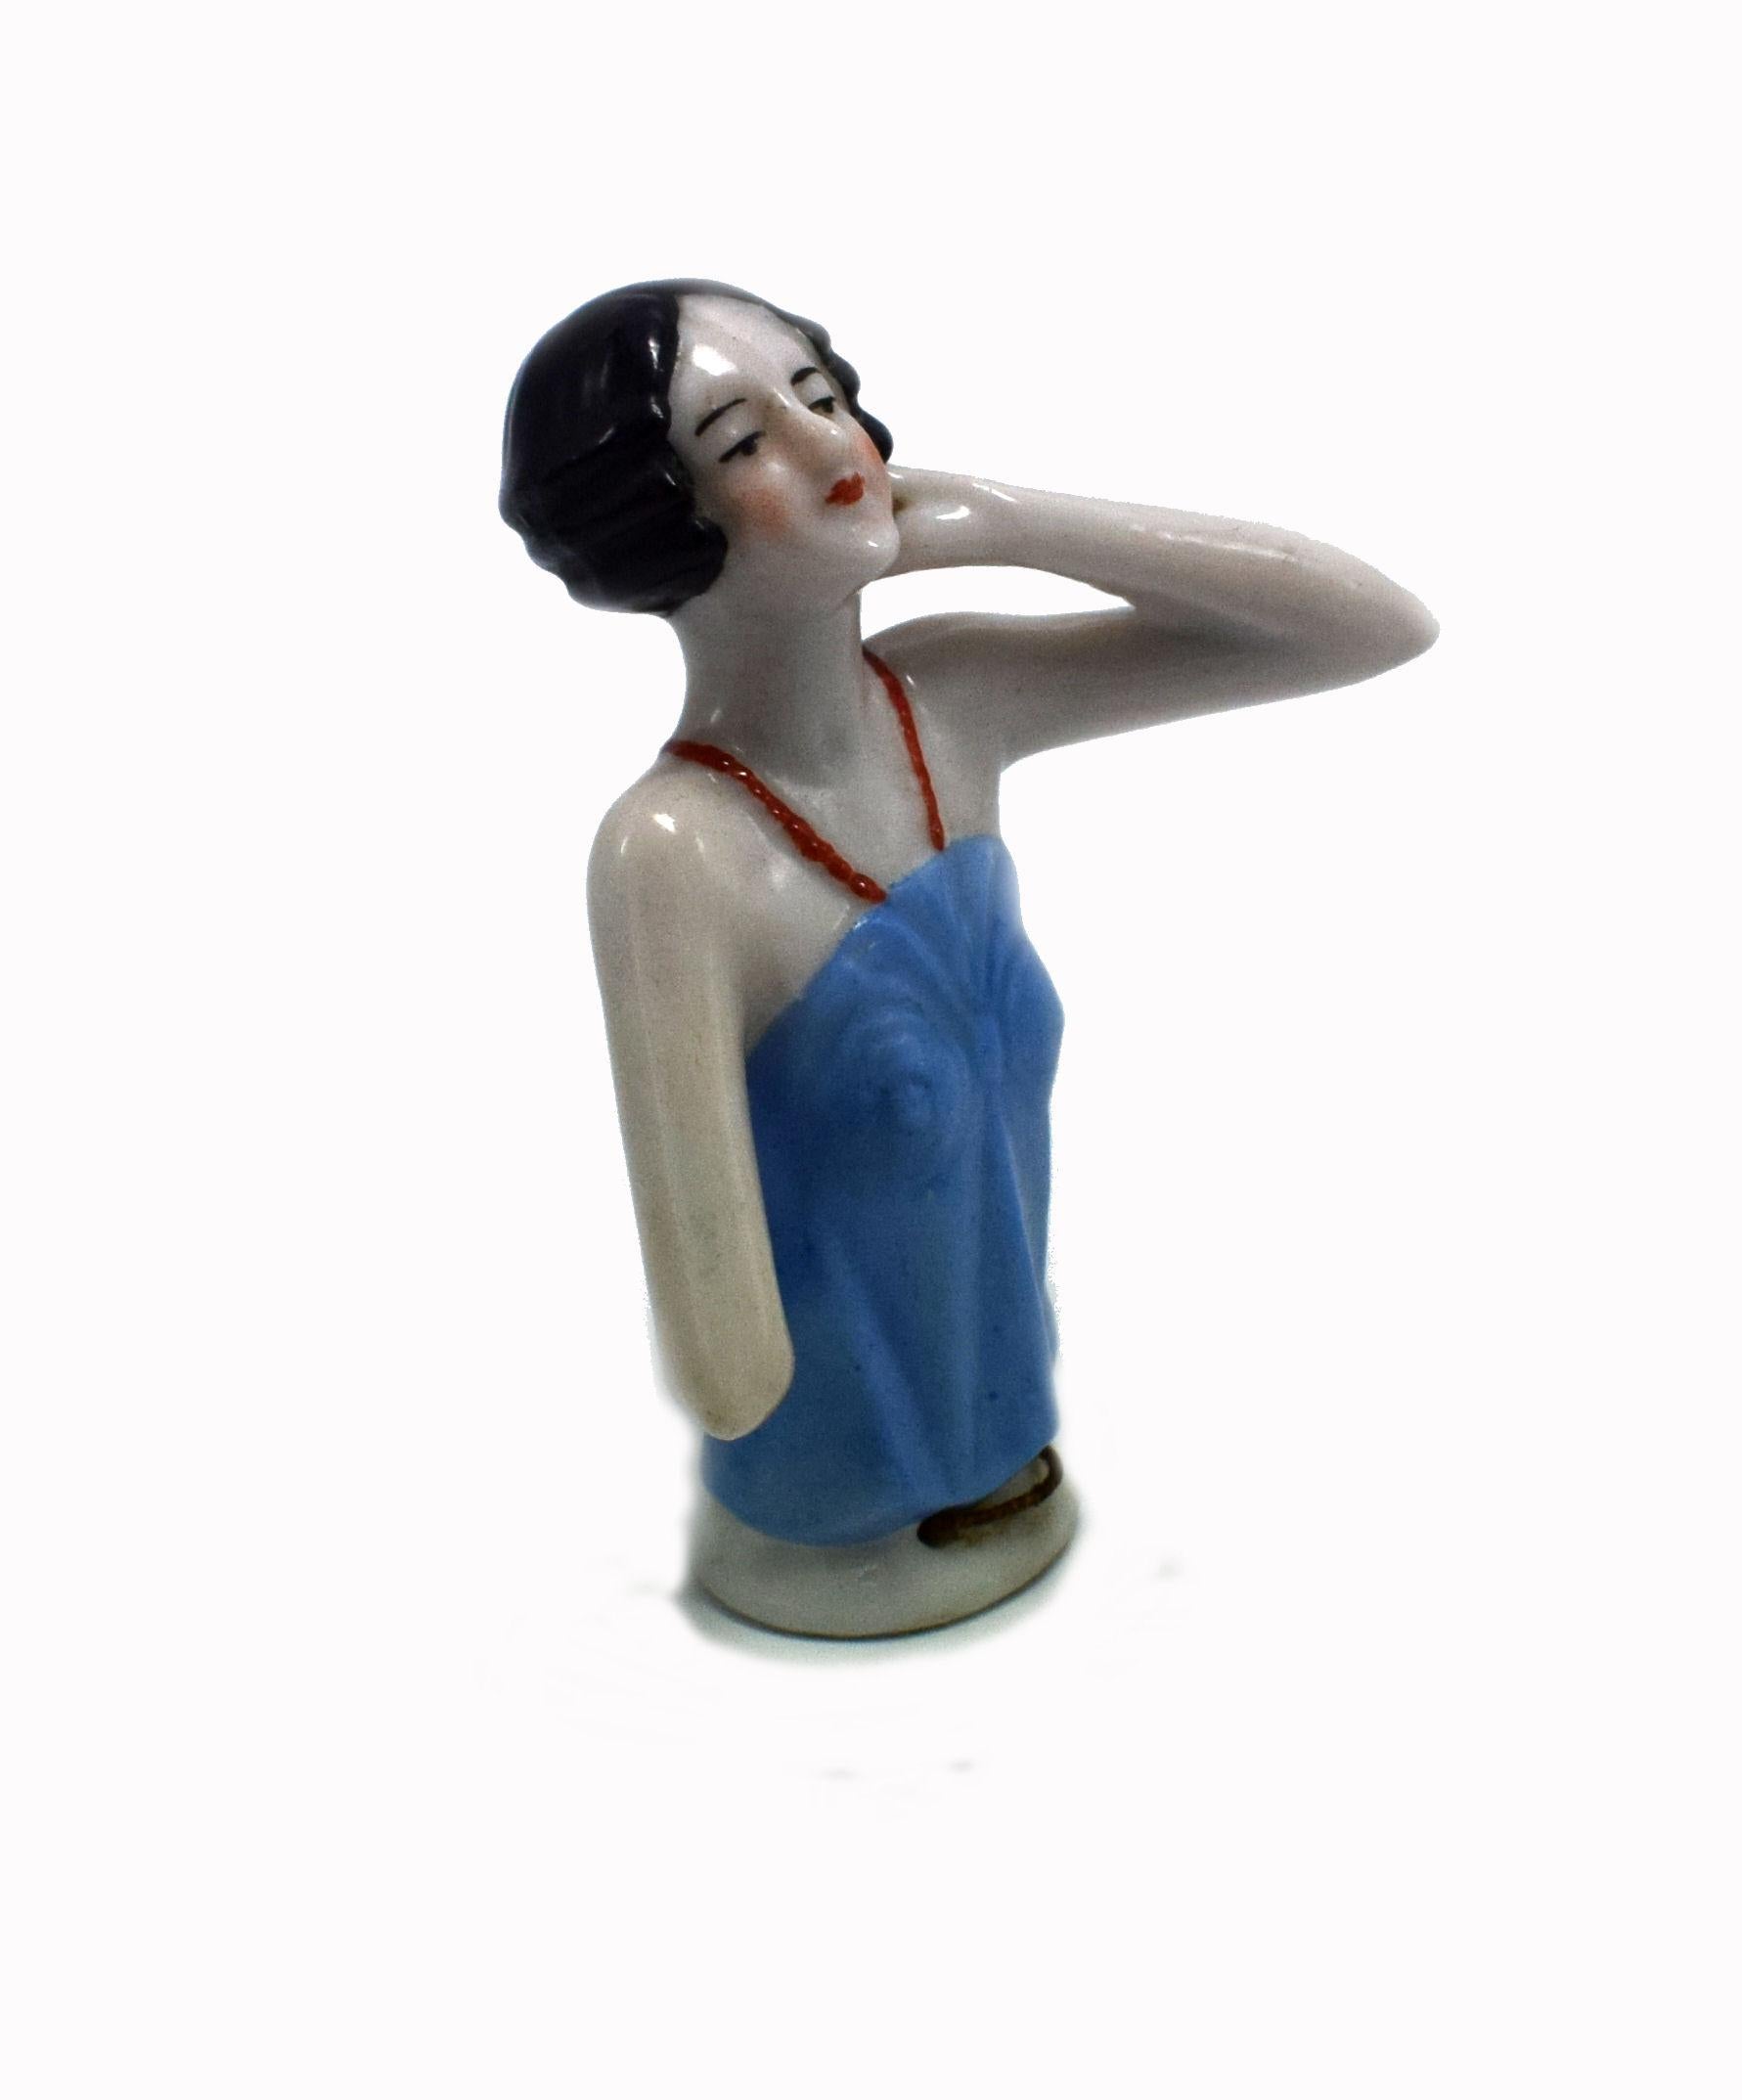 On offer and for your consideration is this charming and totally authentic late 1930s Art Deco German porcelain pin cushion half doll in the form of a pretty flapper girl with a wave black bob hair cut. She's wearing a blue strap top and is